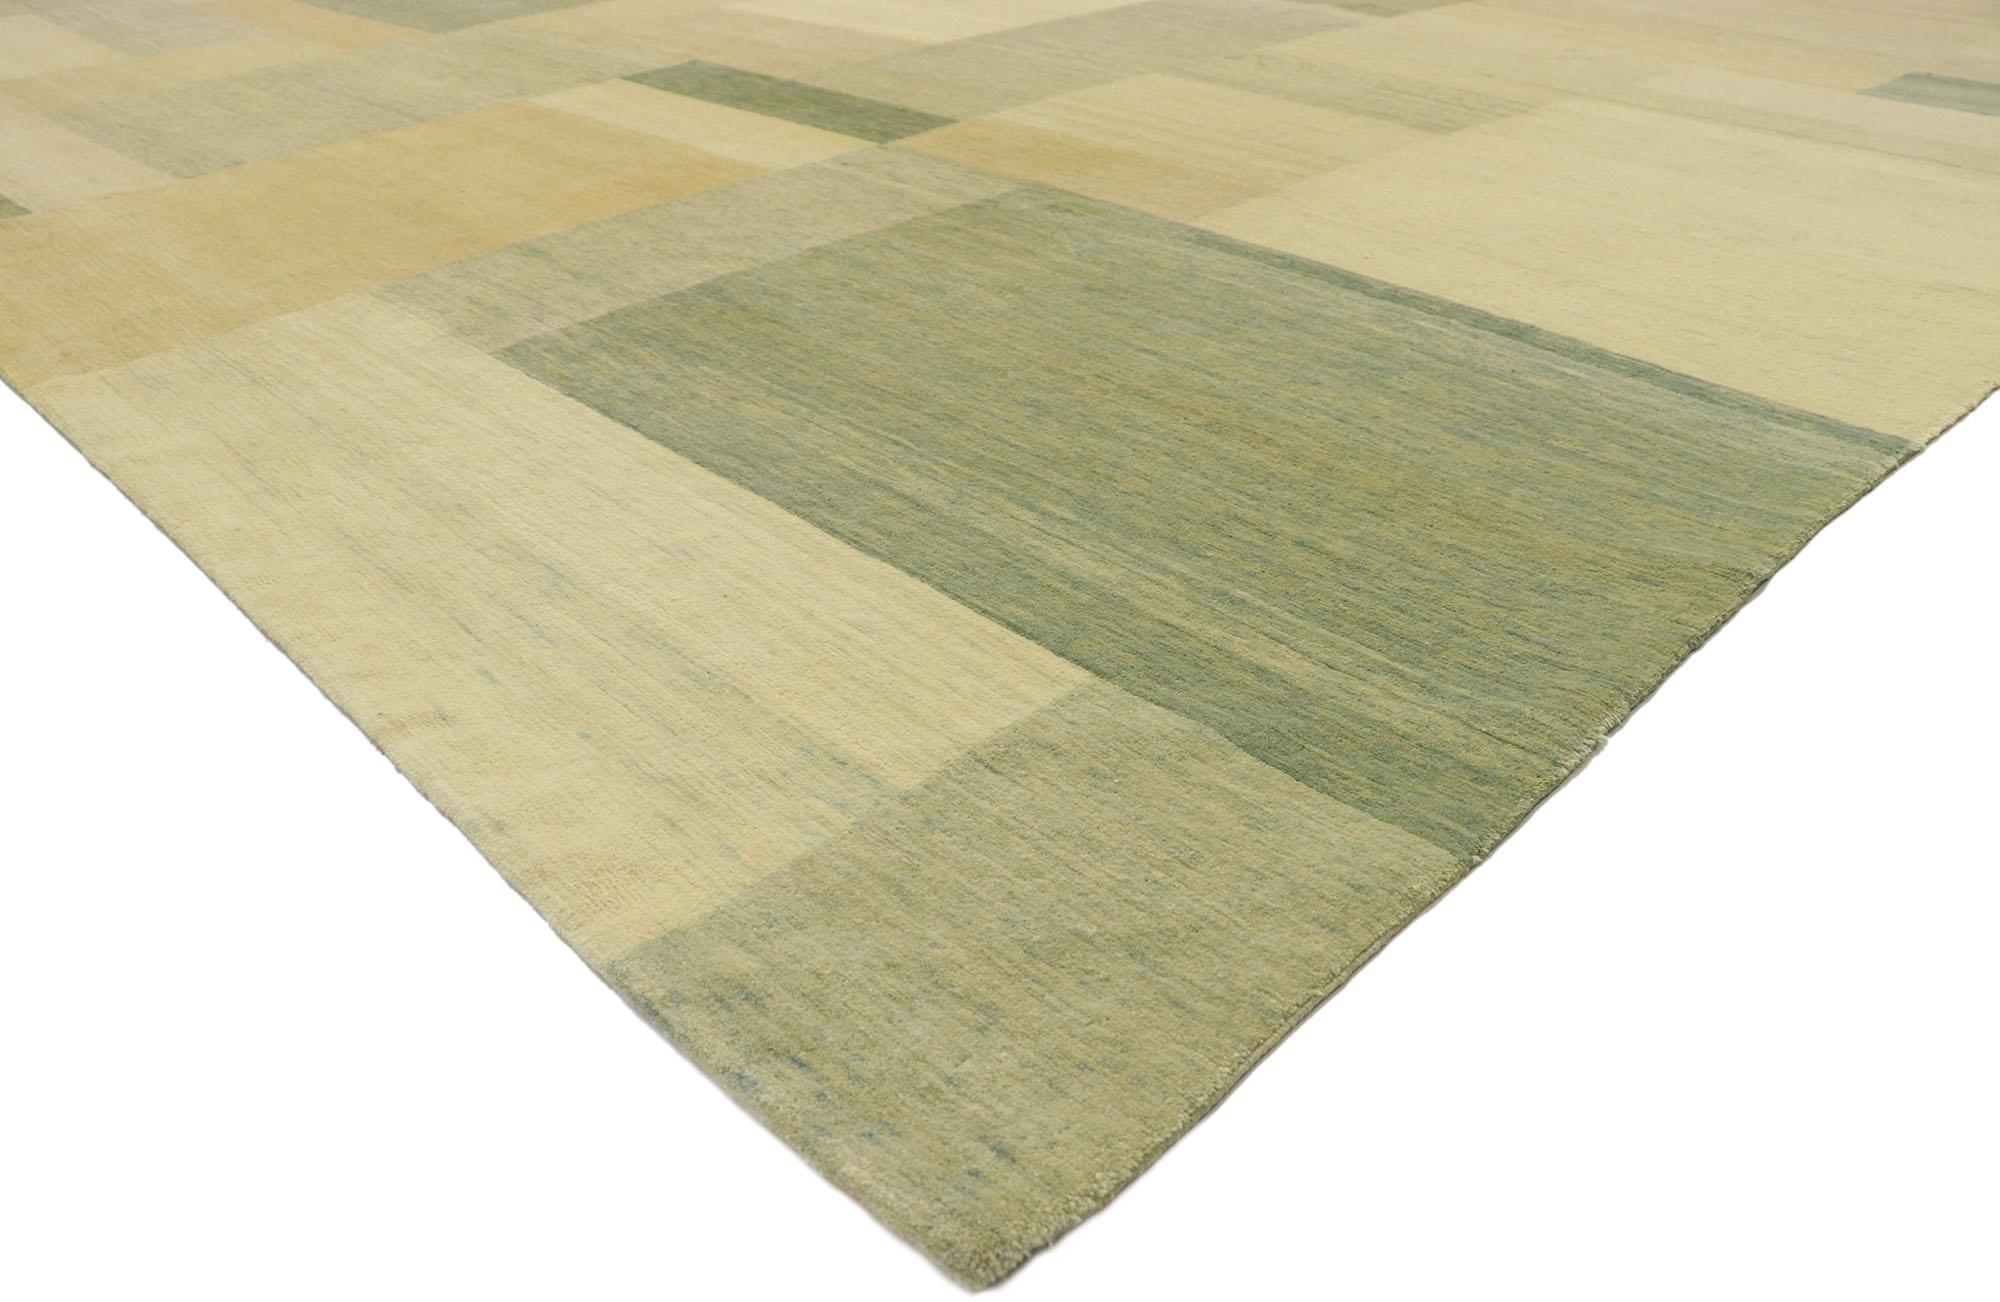 77393, Contemporary Tibetan Odegard Rug with Cubist Bauhaus Style 12'01 x 15'06. Displaying a linear art form composed of squares, rectangles, and cubes, this hand knotted wool contemporary Tibetan area rug embodies cubist Bauhaus style. The